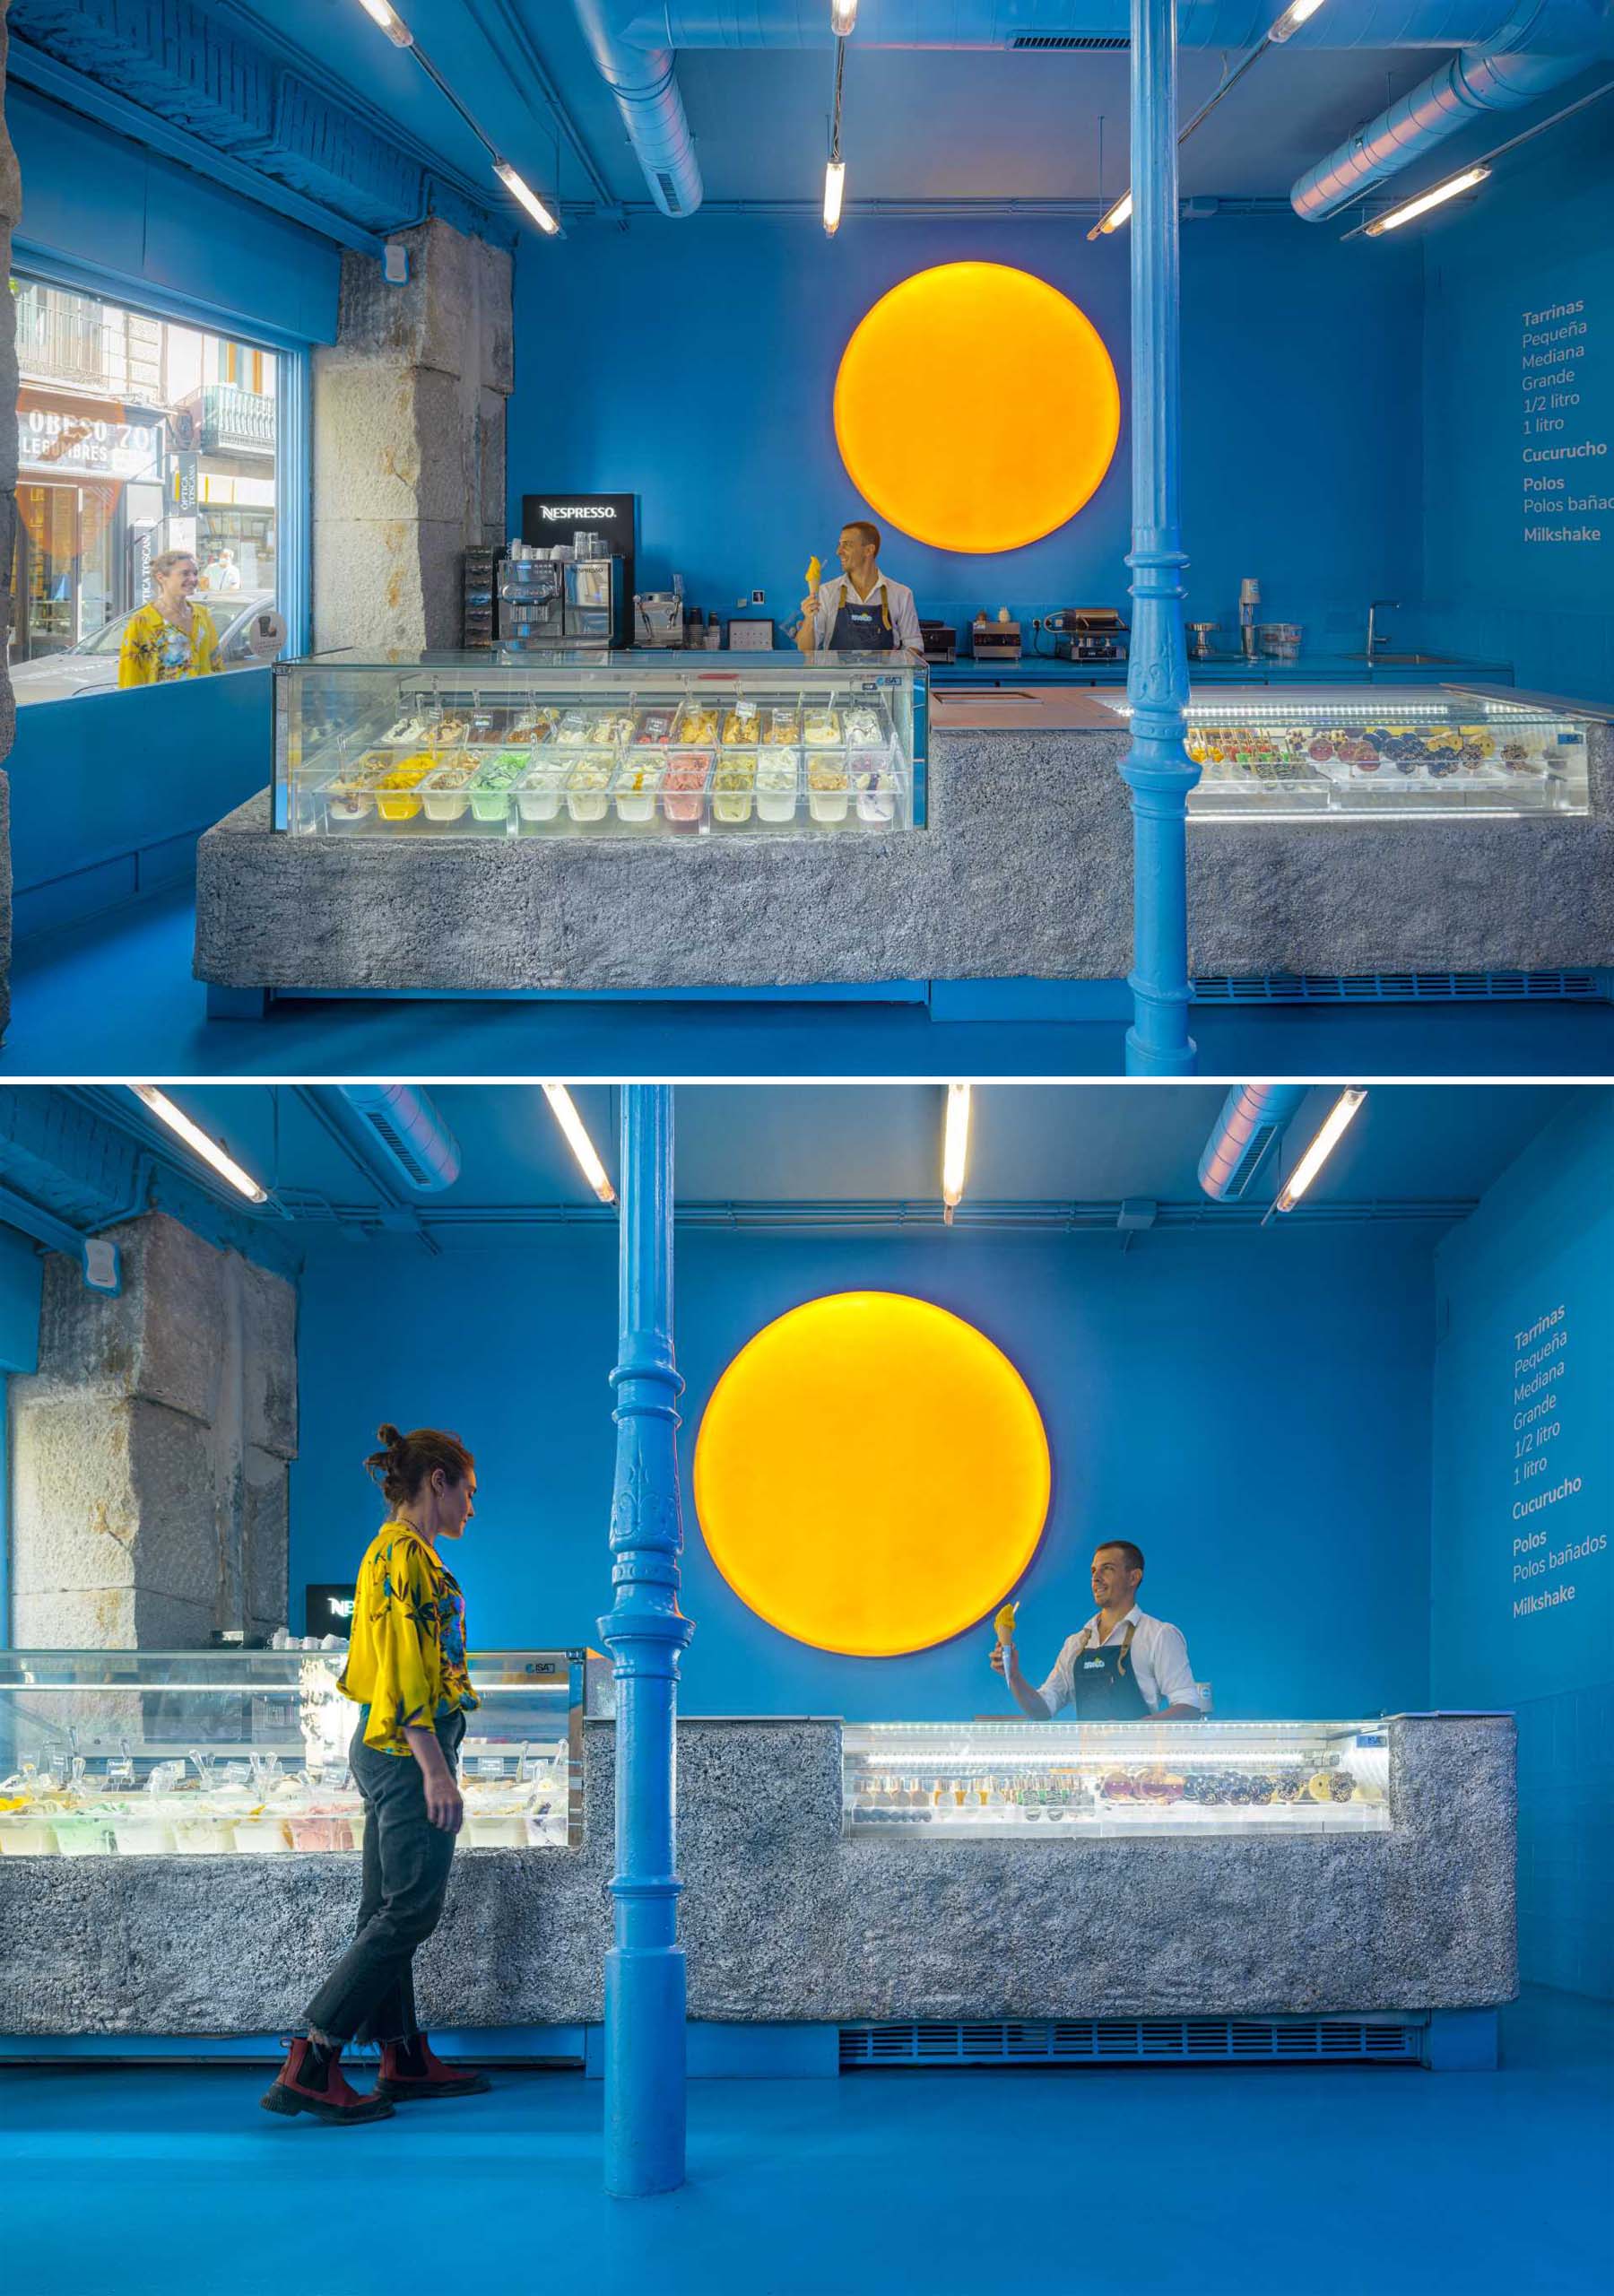 This modern ice cream shop has one side of the store dedicated to the counter and display case that shows the ice creams on offer. The display case has a contrasting concrete base.